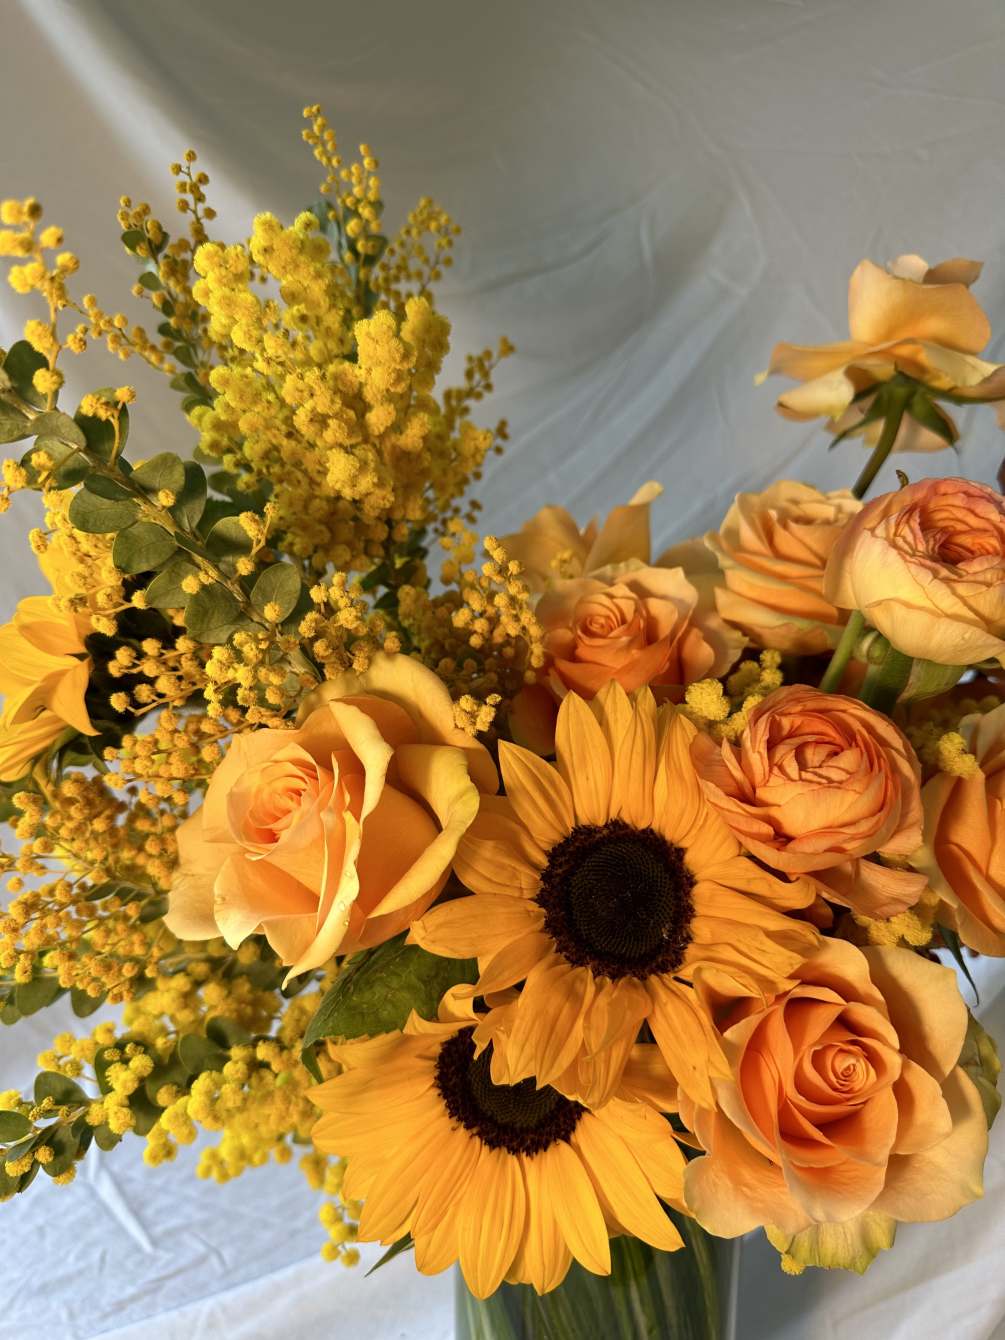 Resembling the magic of the golden hour, these vibrant blooms are sure